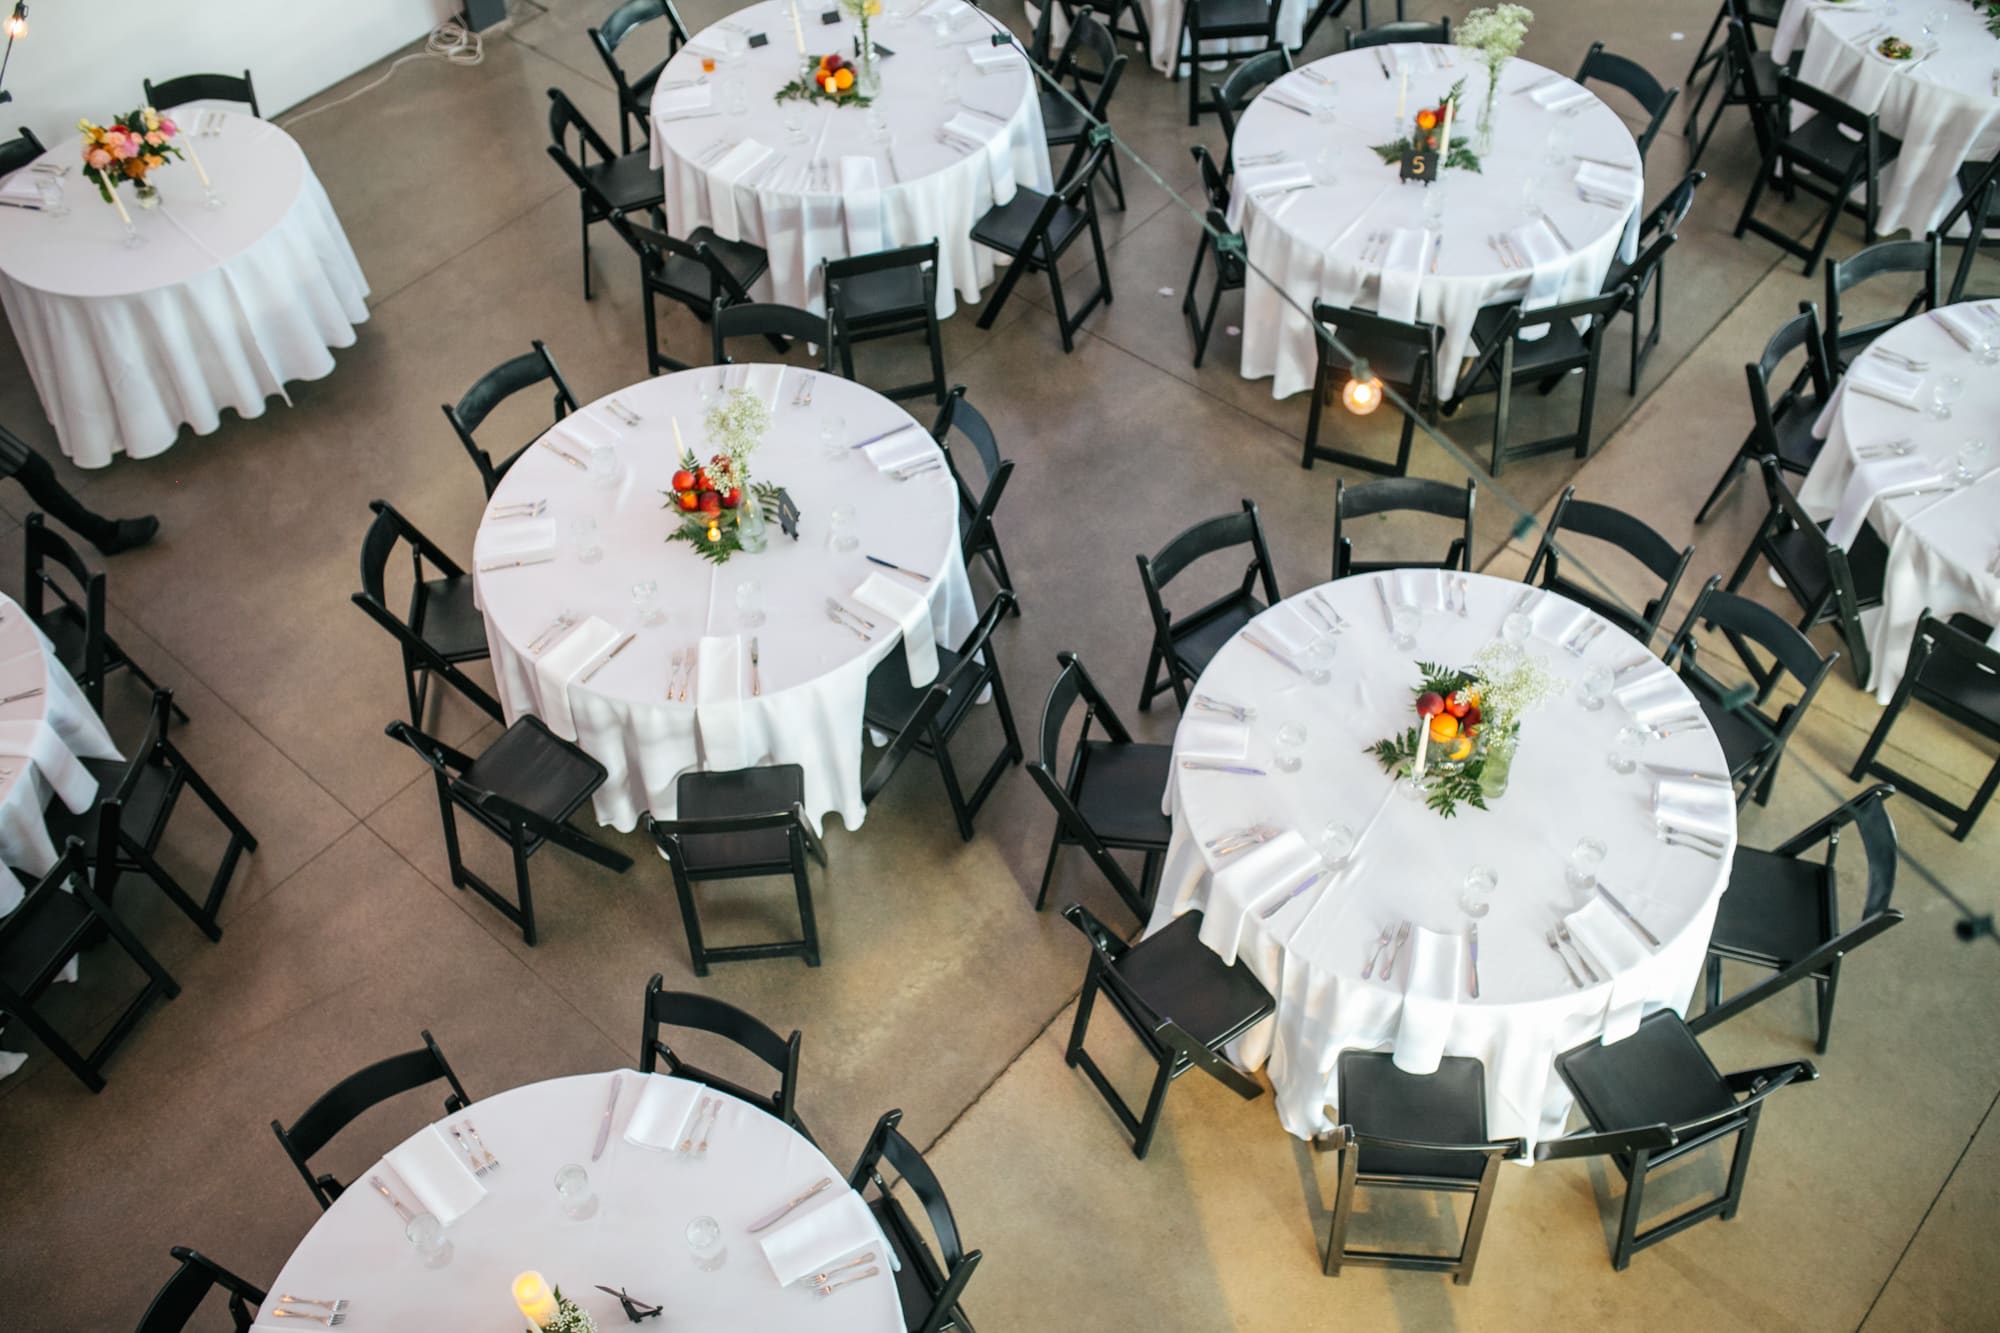 space gallery denver, indoor wedding in denver, art gallery wedding, round tables wedding, simple centerpieces at wedding, white tablecloths at wedding, black dining chairs wedding